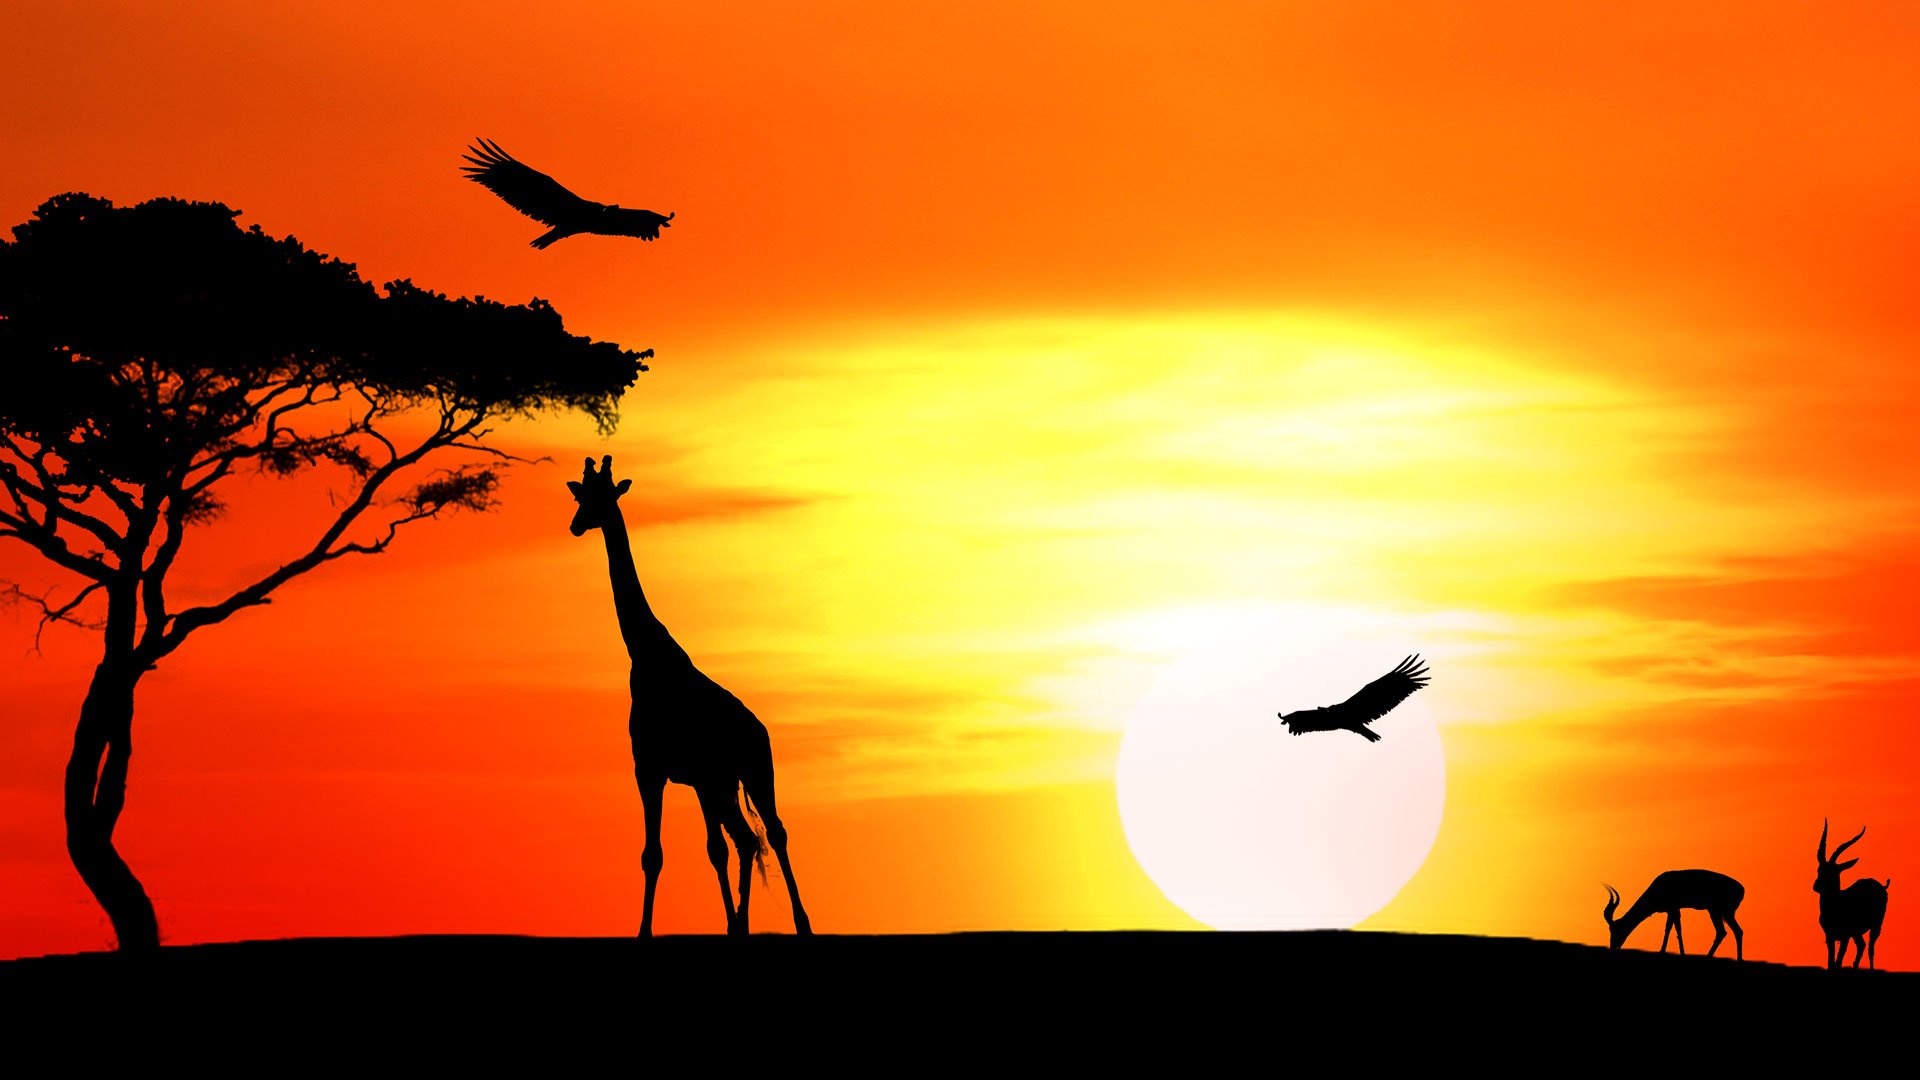 Game hight resolution background Legends of Africa